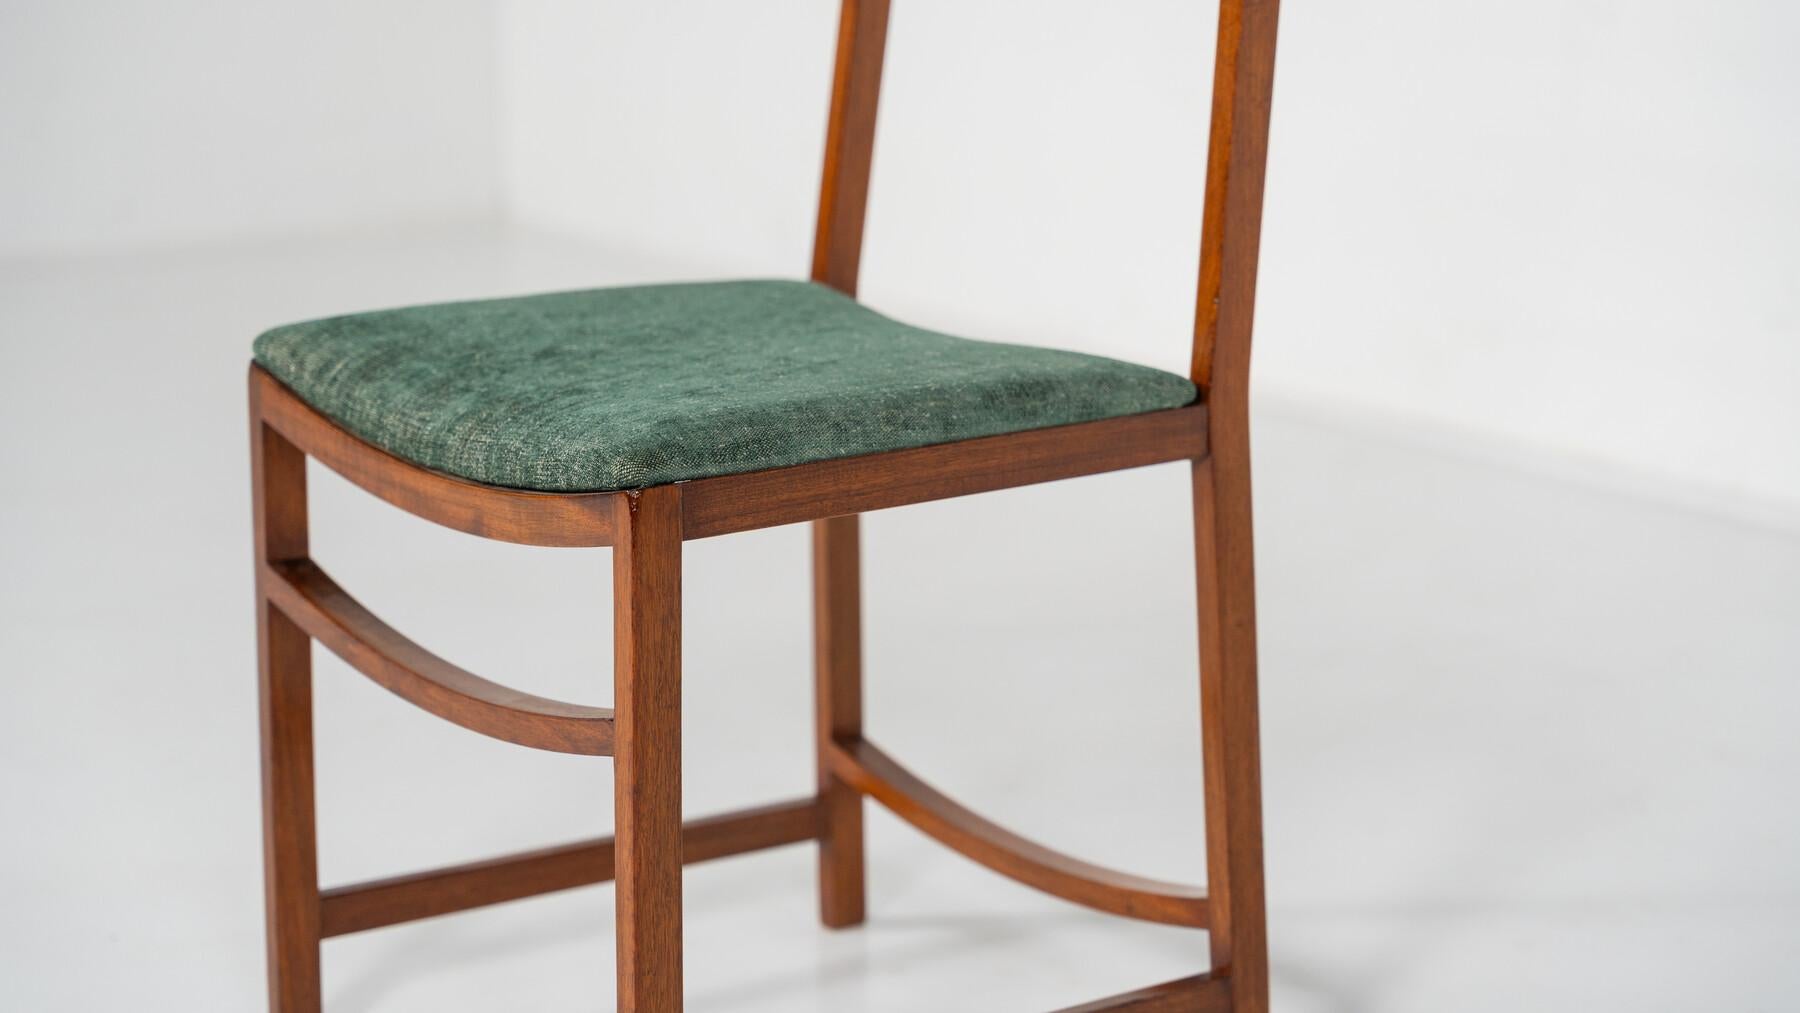 Set of 8 Mid-Century Modern Dining Chairs by Renato Venturi for MIM, 1950s For Sale 13